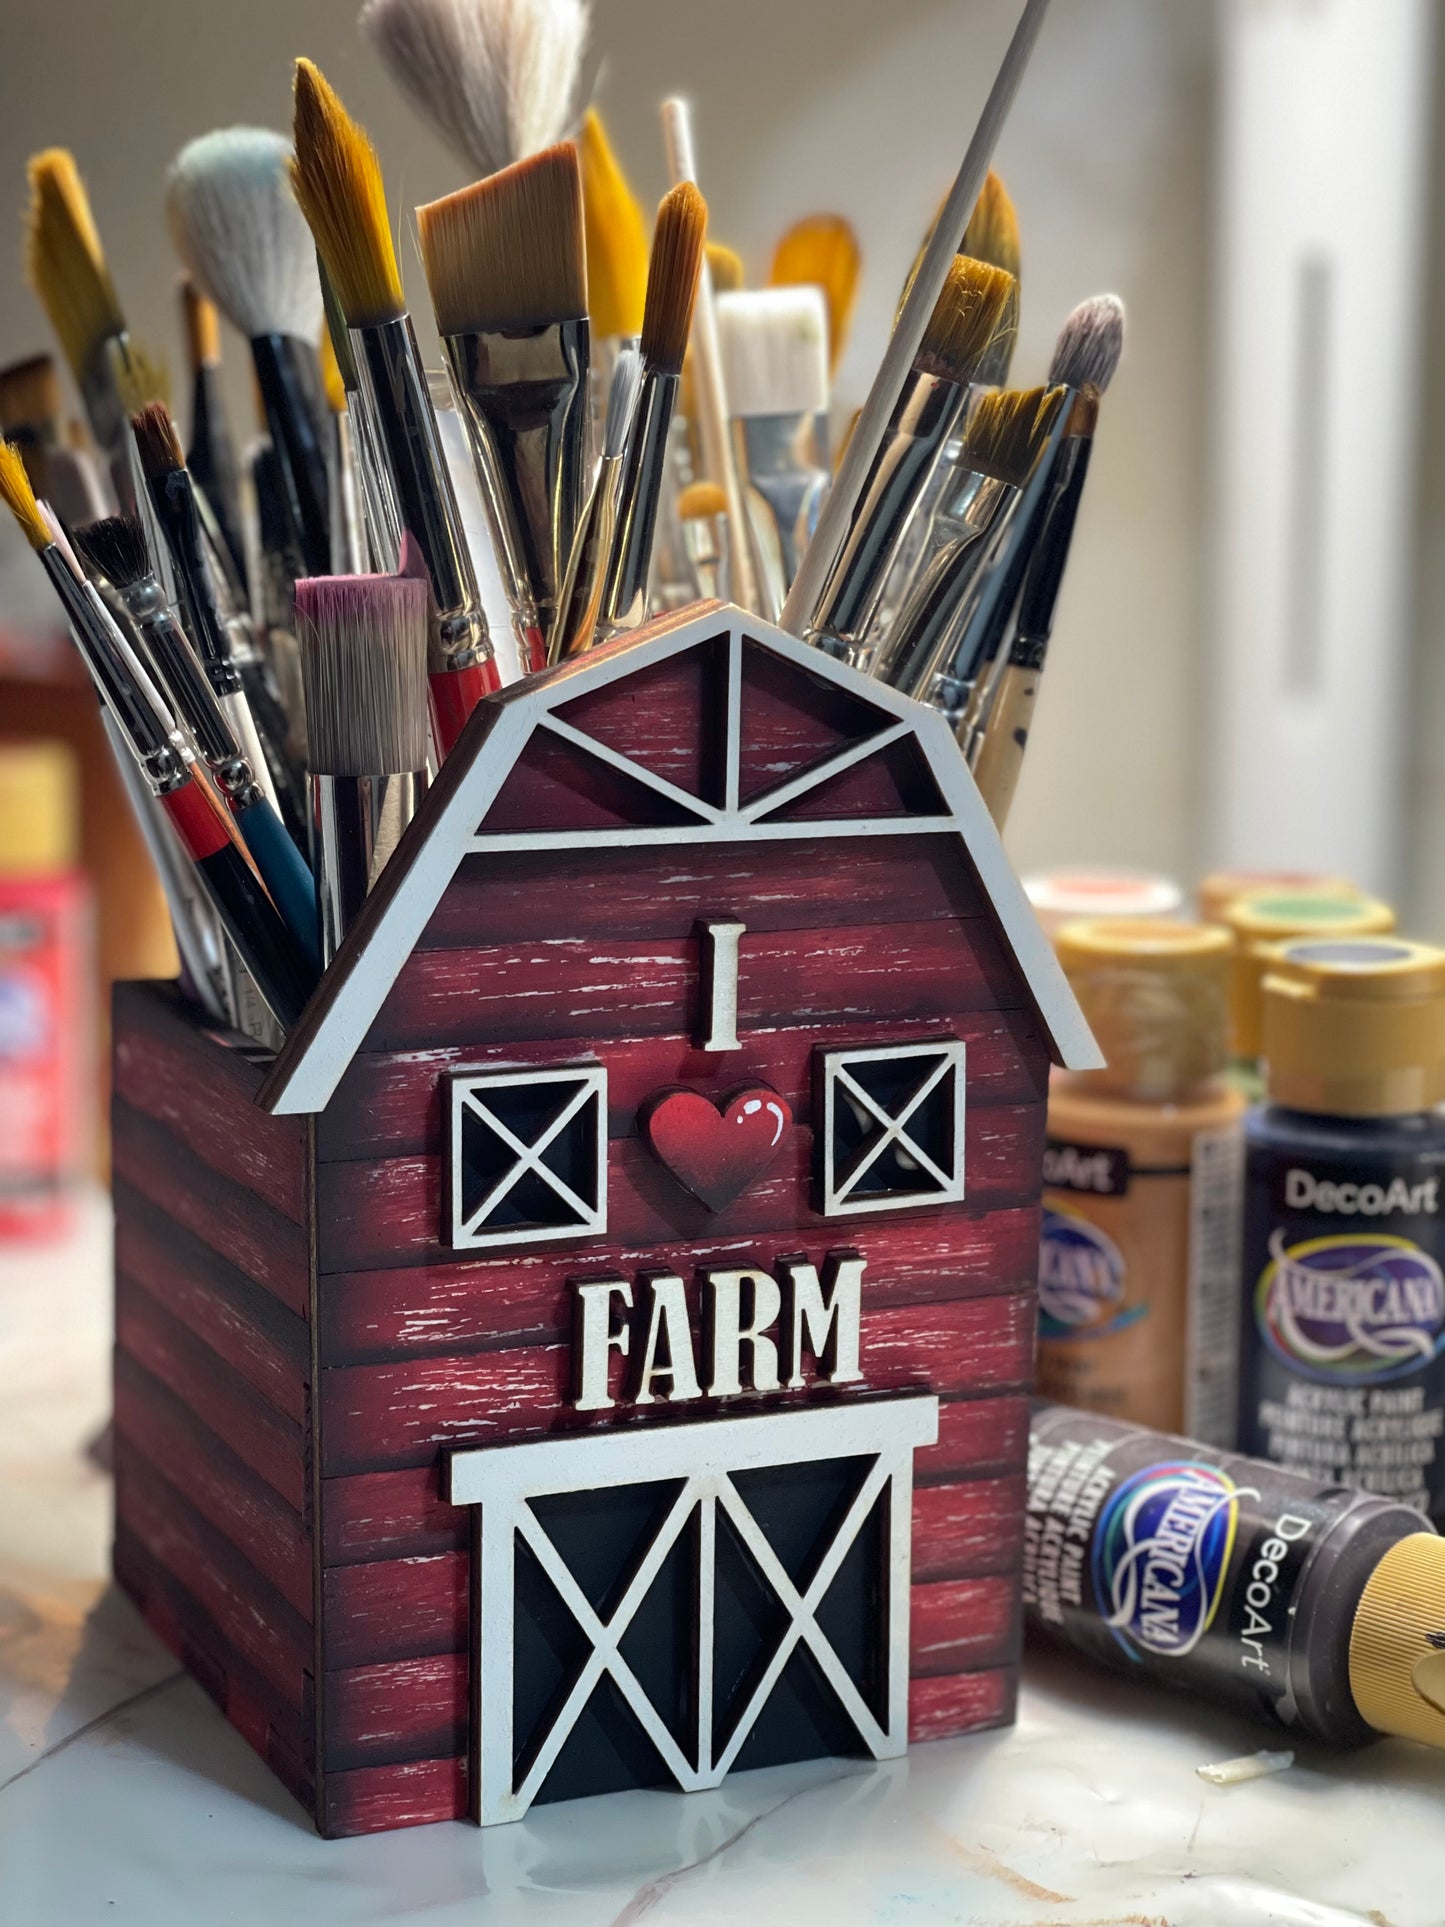 Portapennelli/ brush holder “I love farm” Out of the Wood